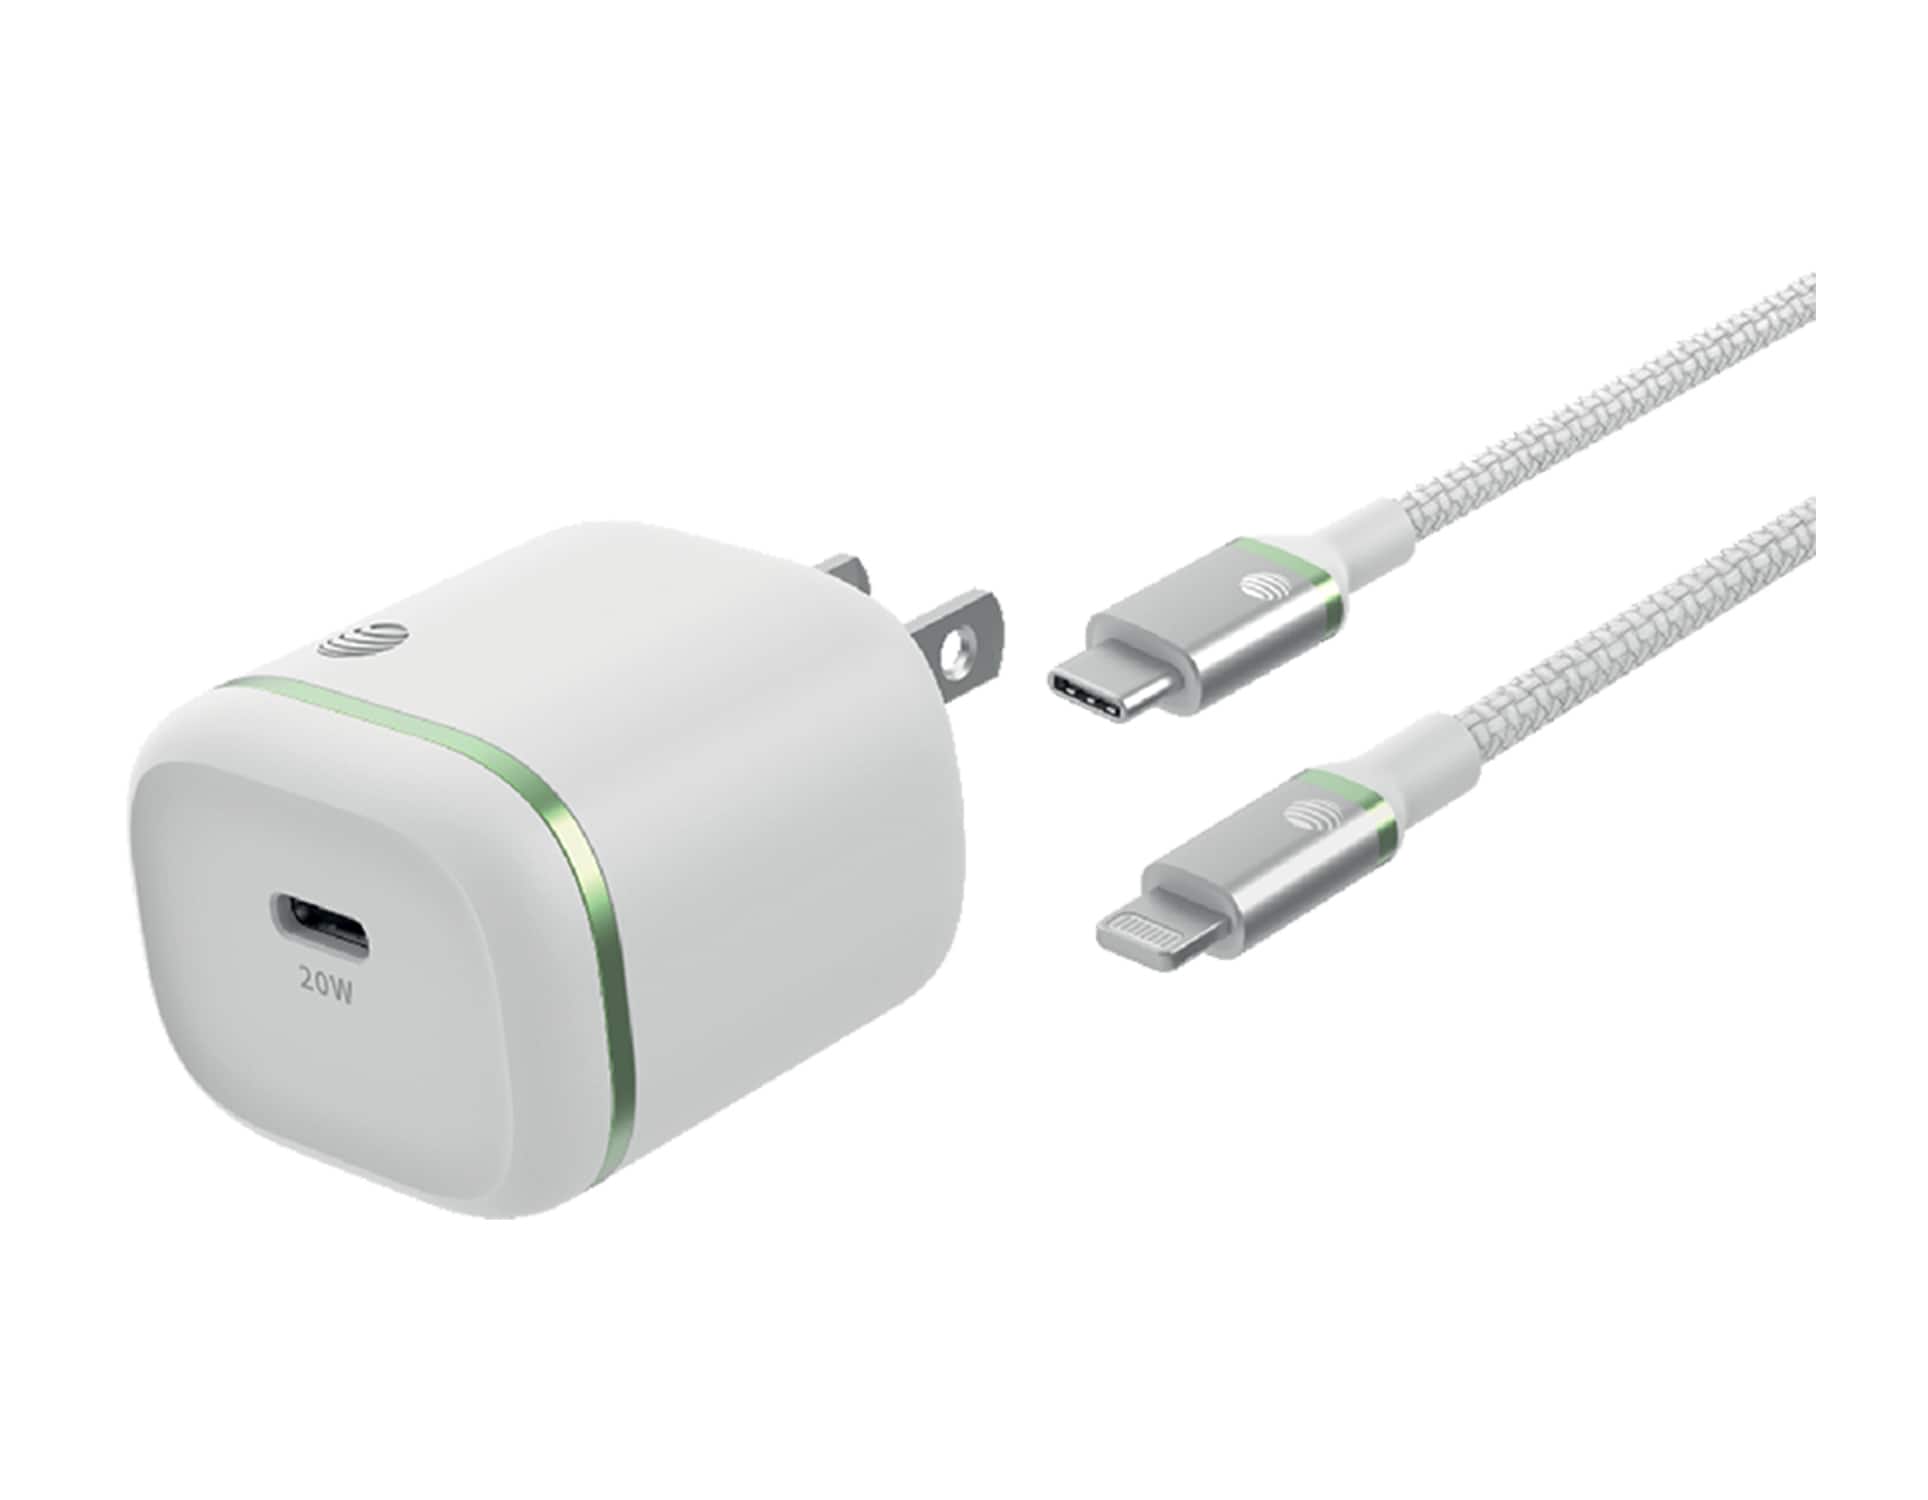 https://www.att.com/scmsassets/global/accessories/chargers/superior/att-20w-usb-c-power-delivery-wall-block-with-lightning-cable/defaultimage/4630q-8-hero-zoom.jpg